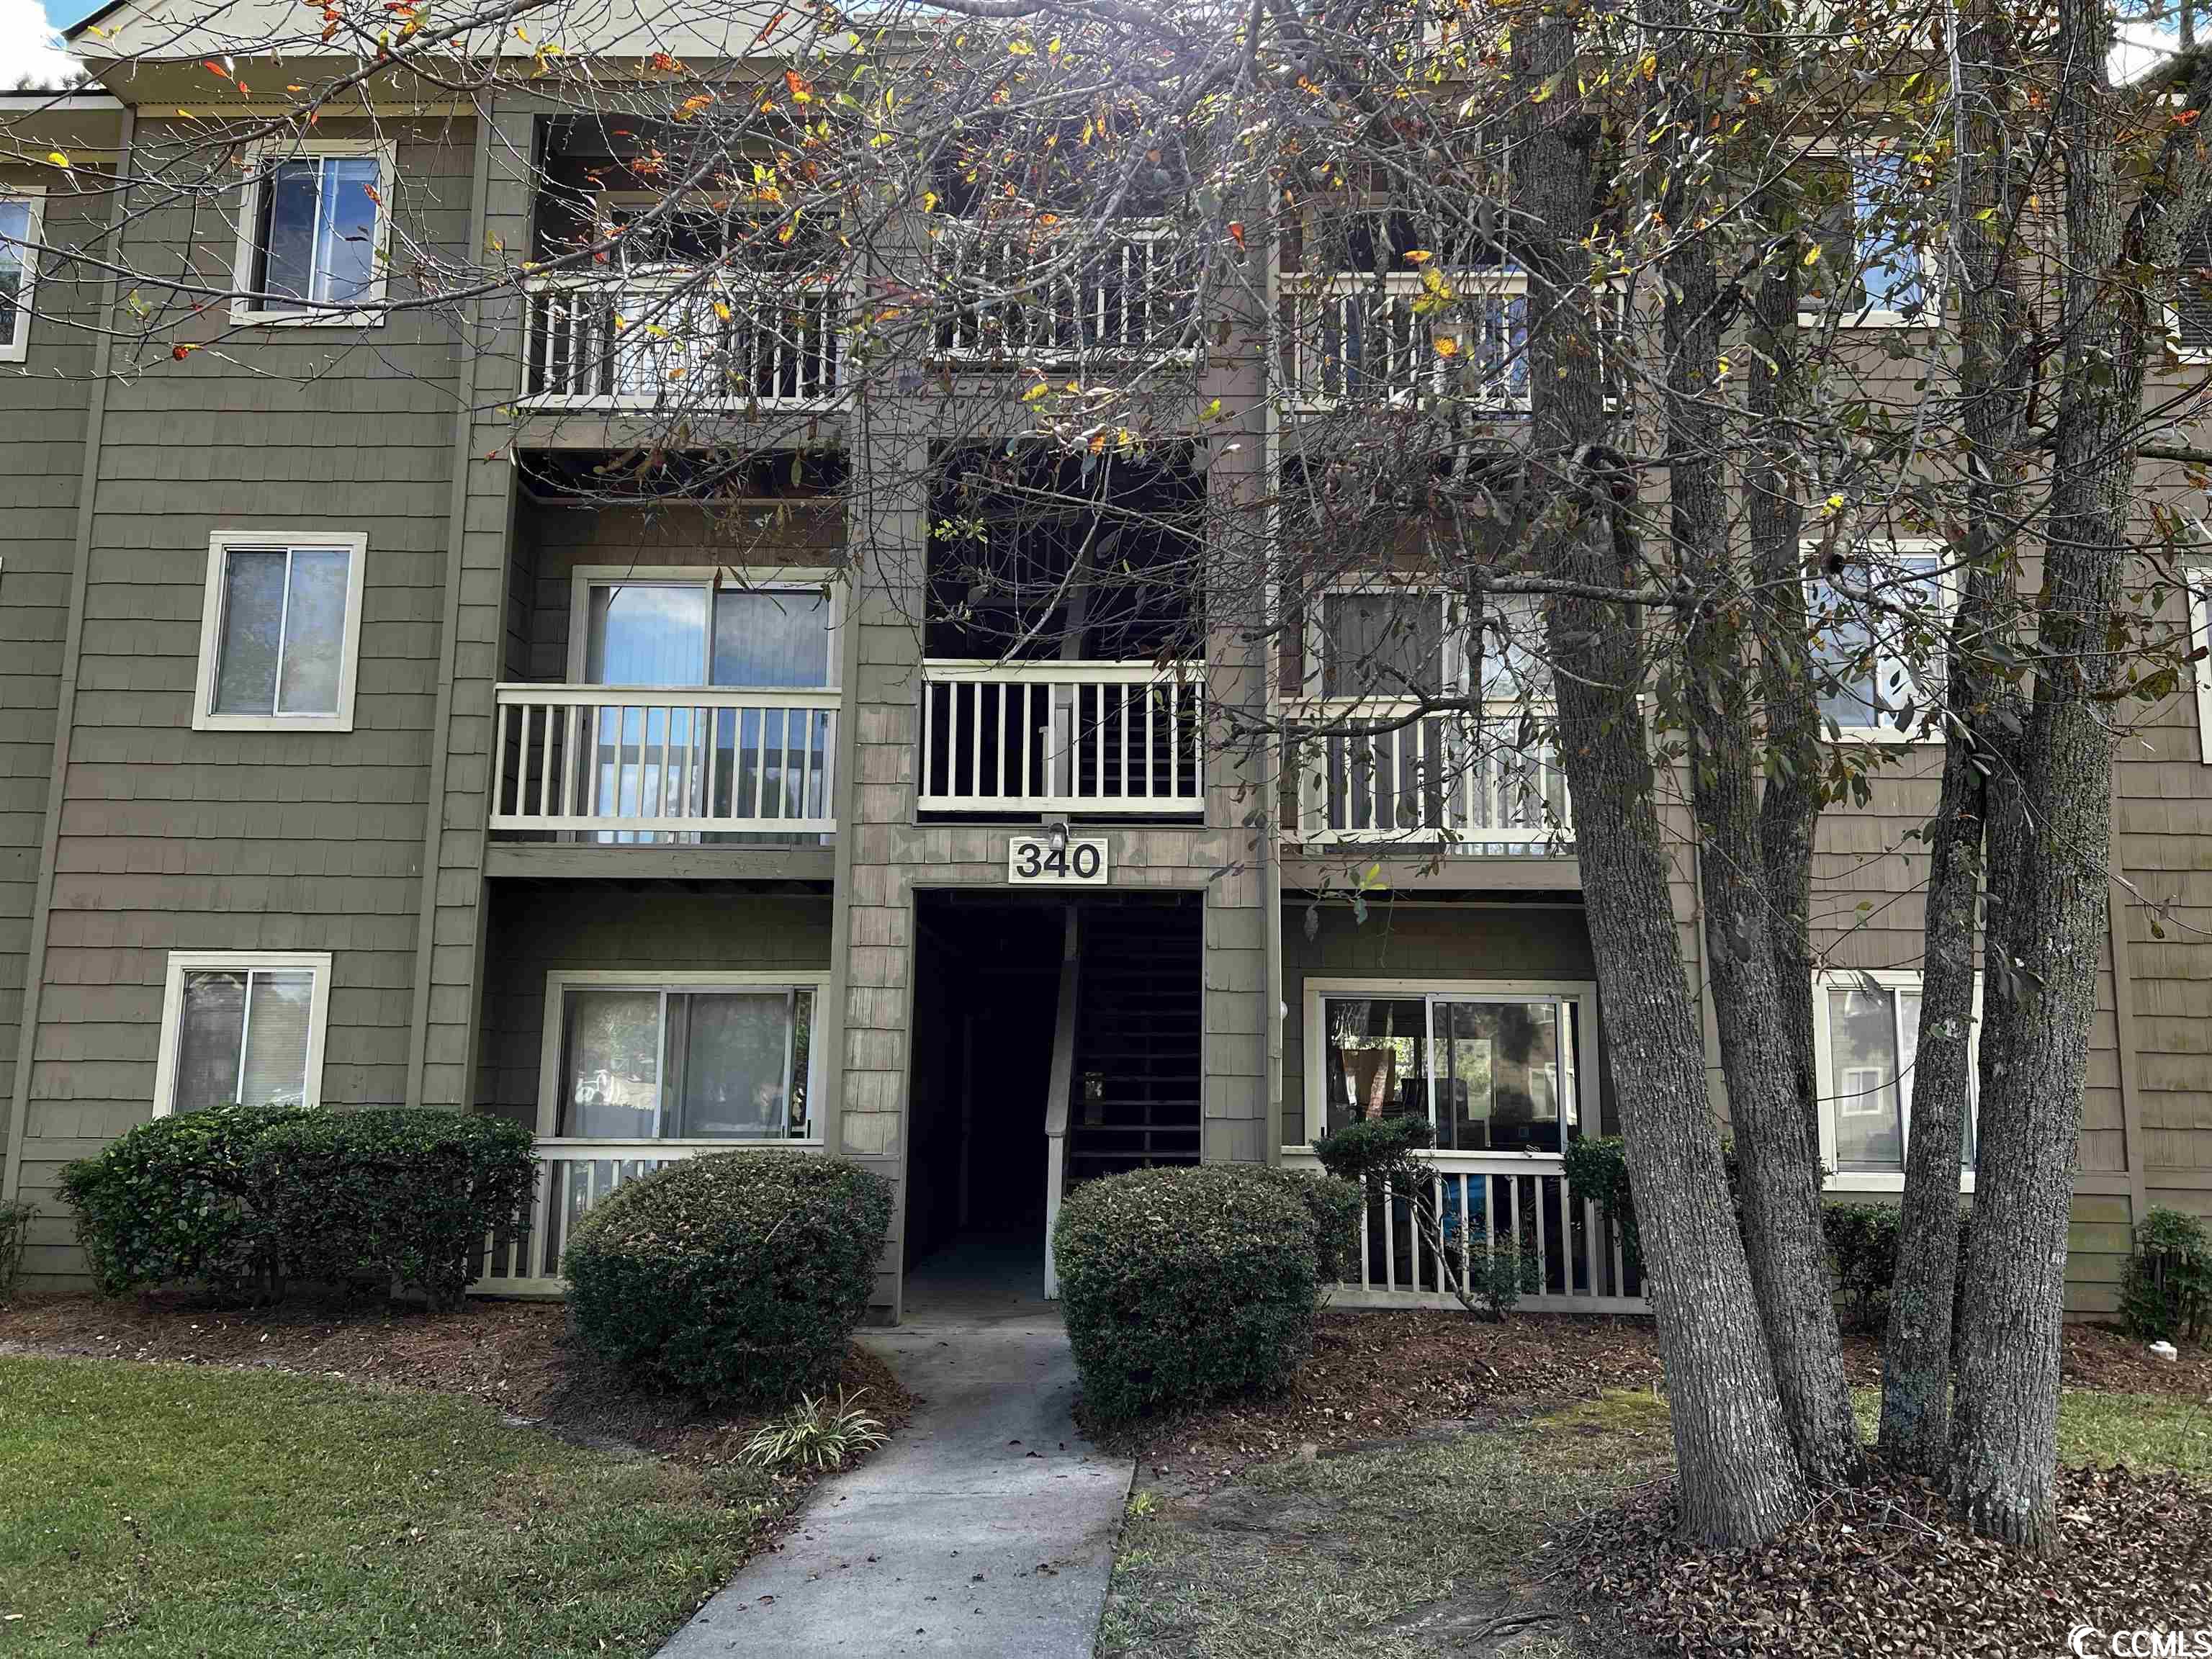 update!!! newly painted--spacious one bedroom condo, beautiful setting, second floor unit. close to both colleges (coastal and hgtc) as well as hospital.  move-in ready.   the unit also contains a dishwasher, stove, fridge, microwave, and garbage disposal, all which have been purchased and installed within the last 15 months.